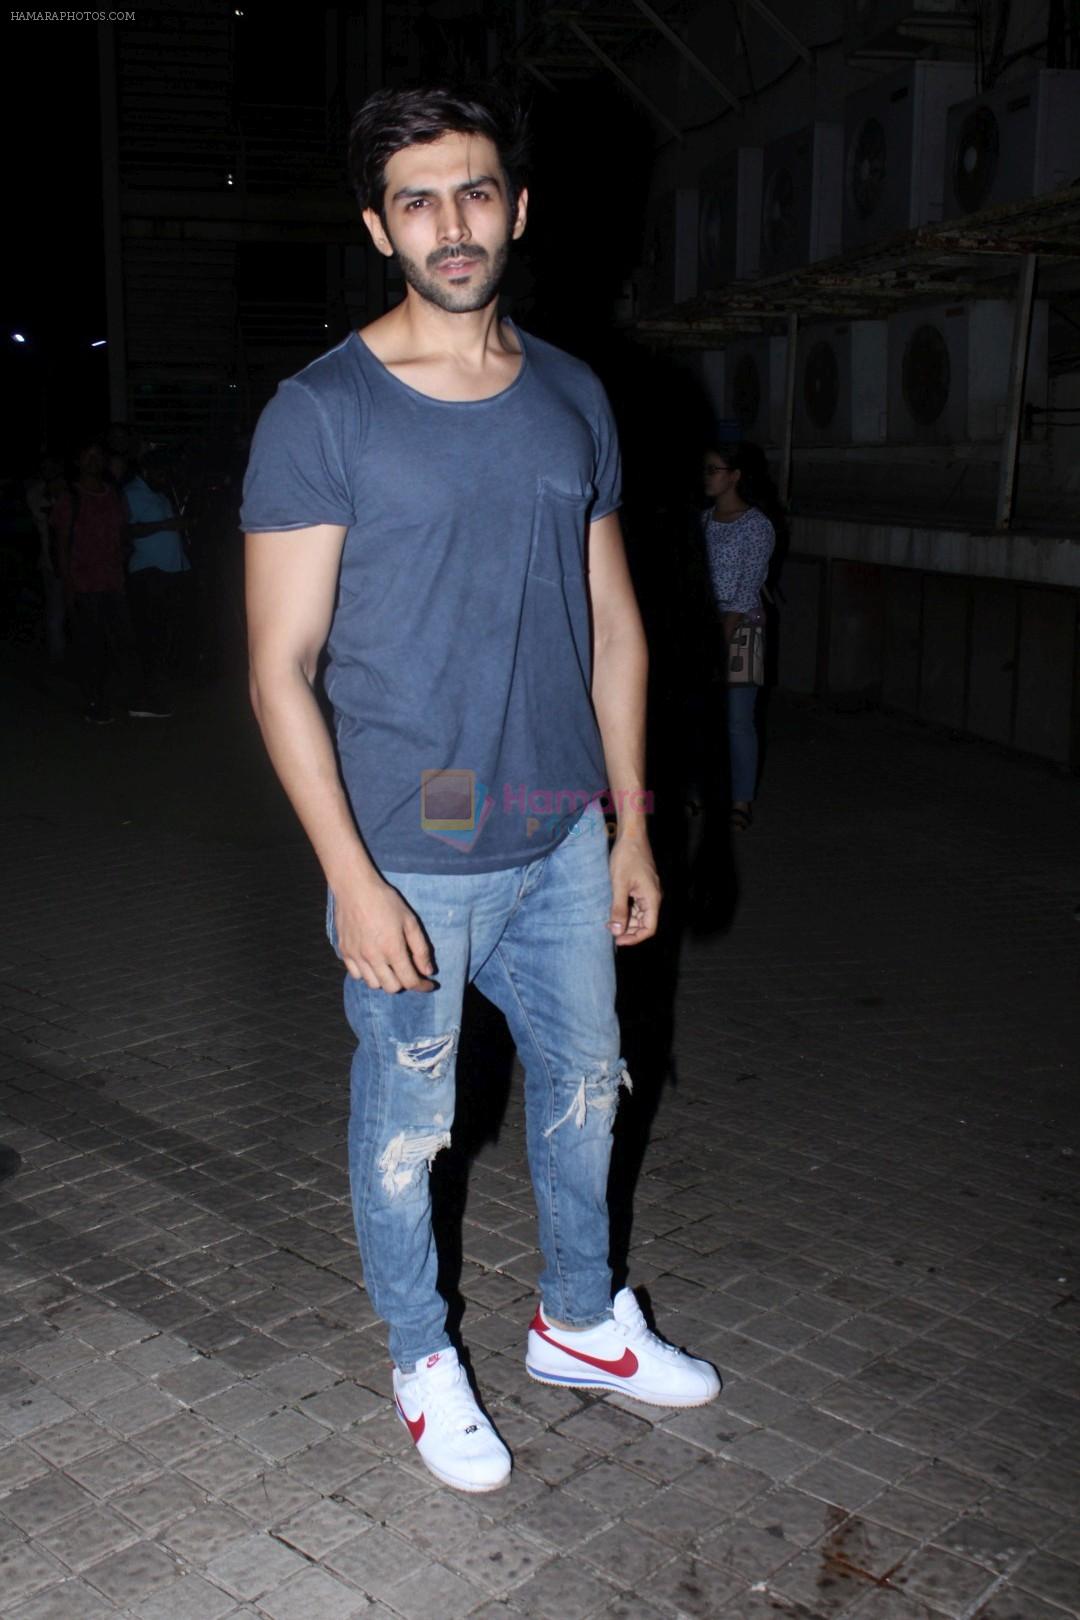 Kartik Aaryan at the Special Screening Of Film Partition 1947 on 17th Aug 2017